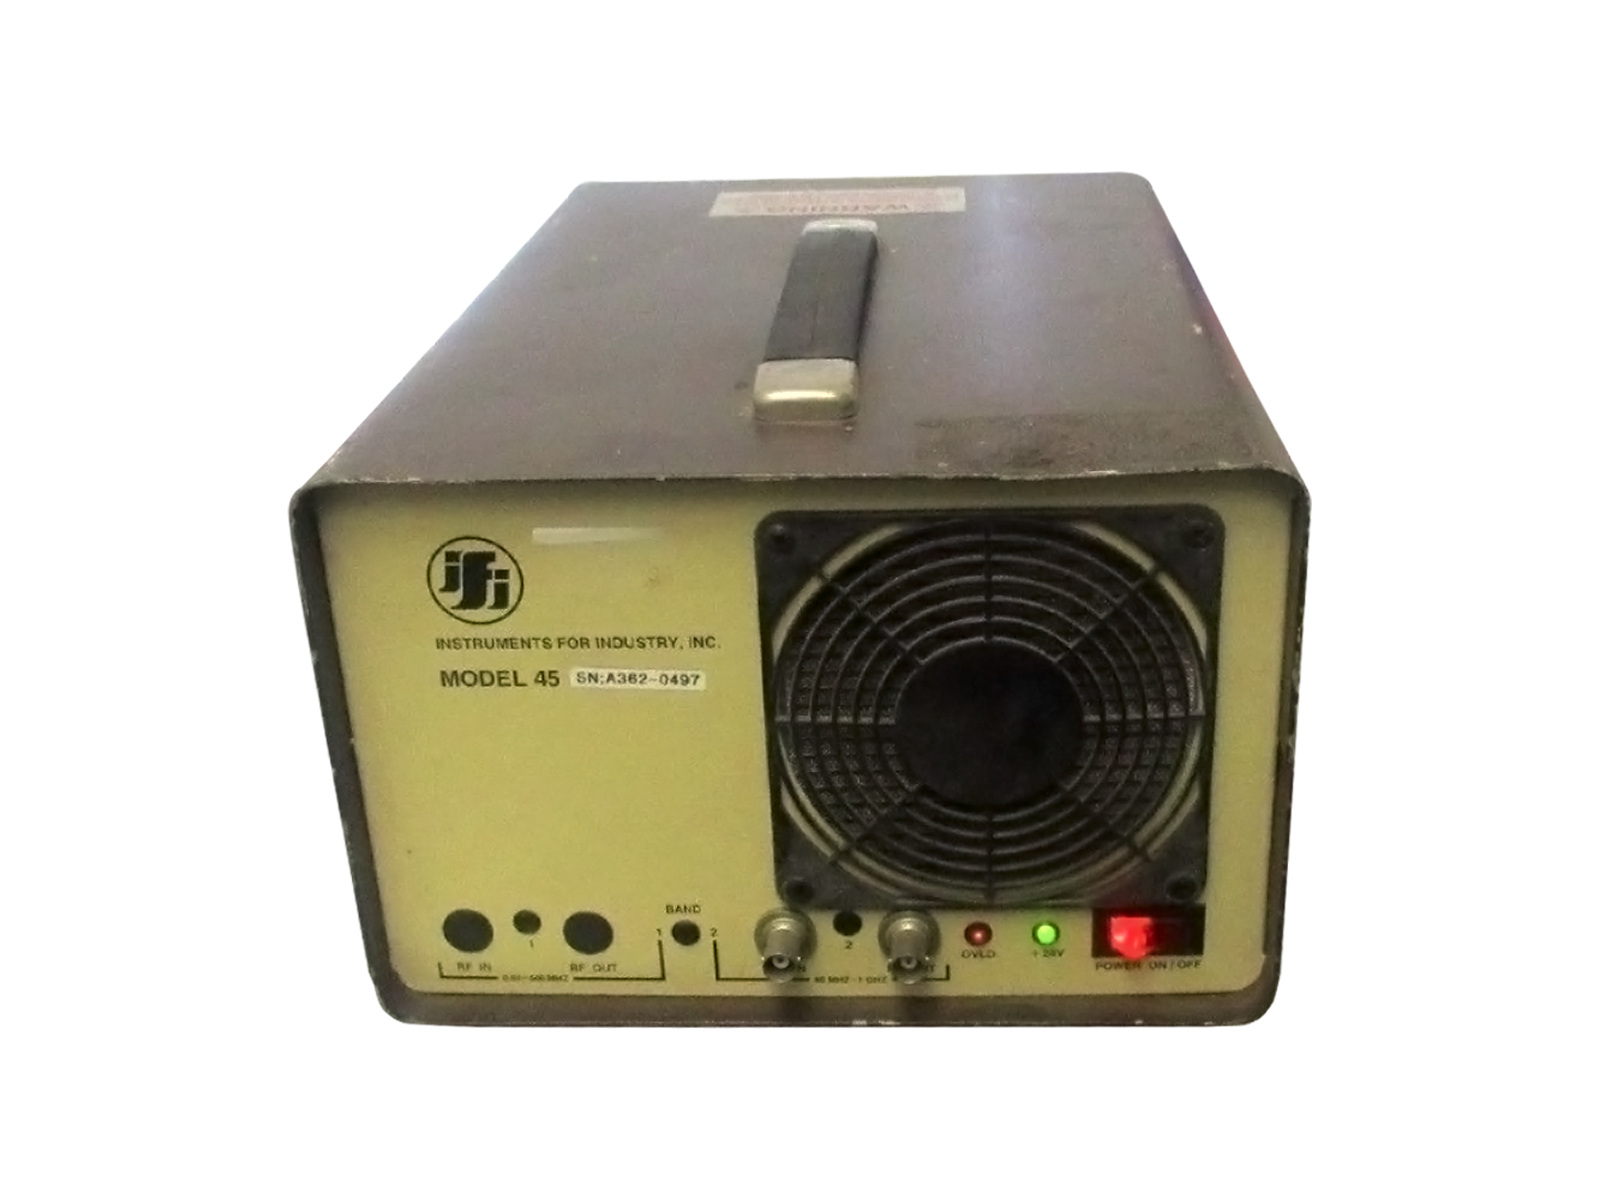 instruments-for-industry-ifi-m-series-solid-state-rf-amplifier-model-45-0.jpg